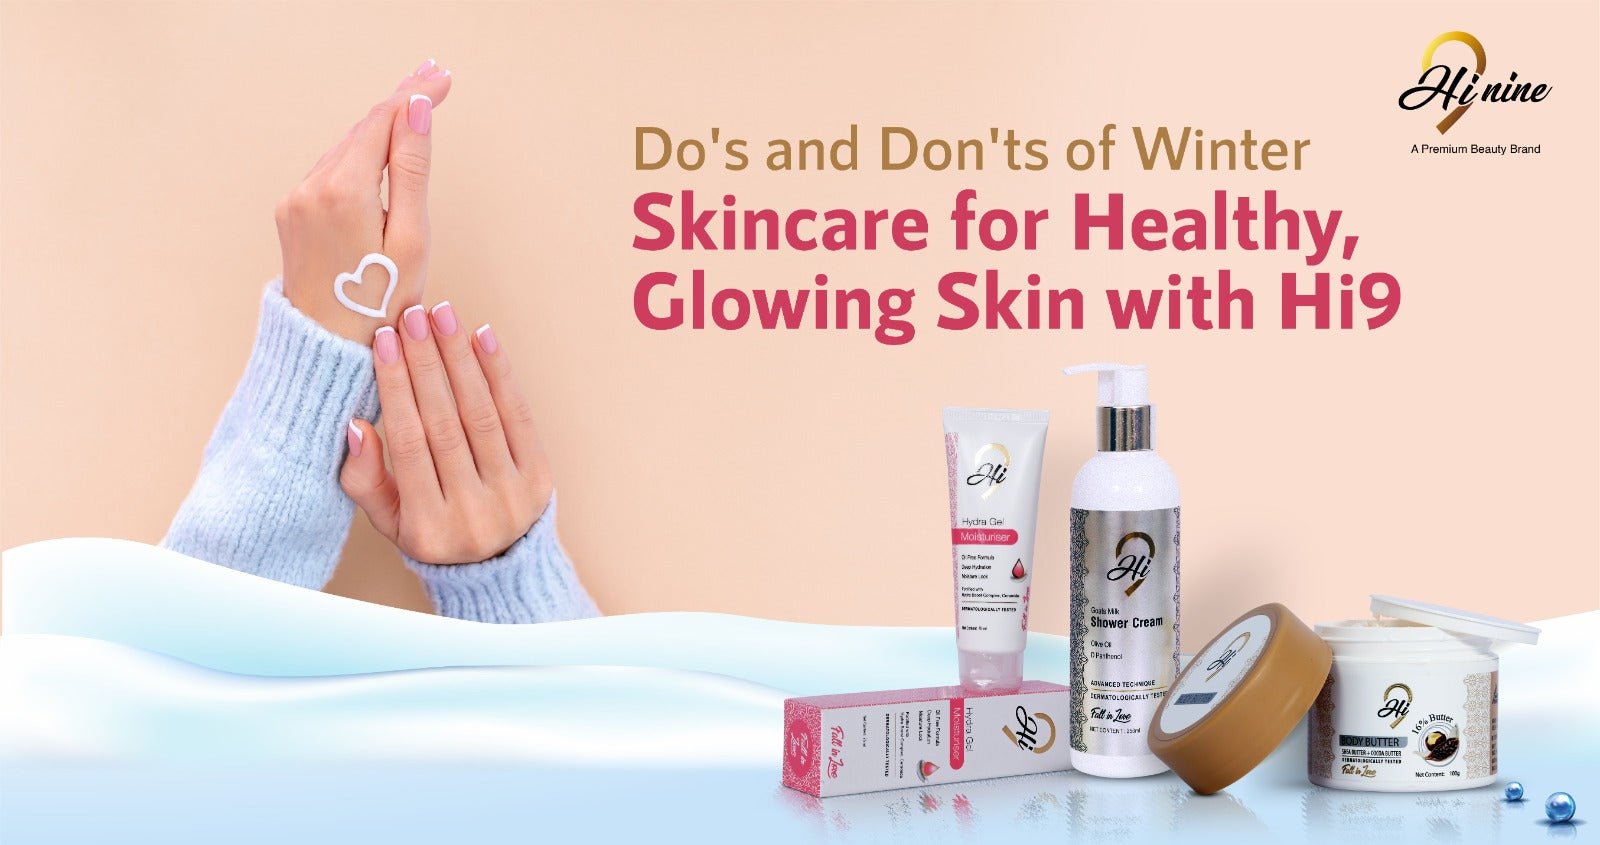 Do's and Don'ts of Winter Skincare for Healthy, Glowing Skin with Hi9